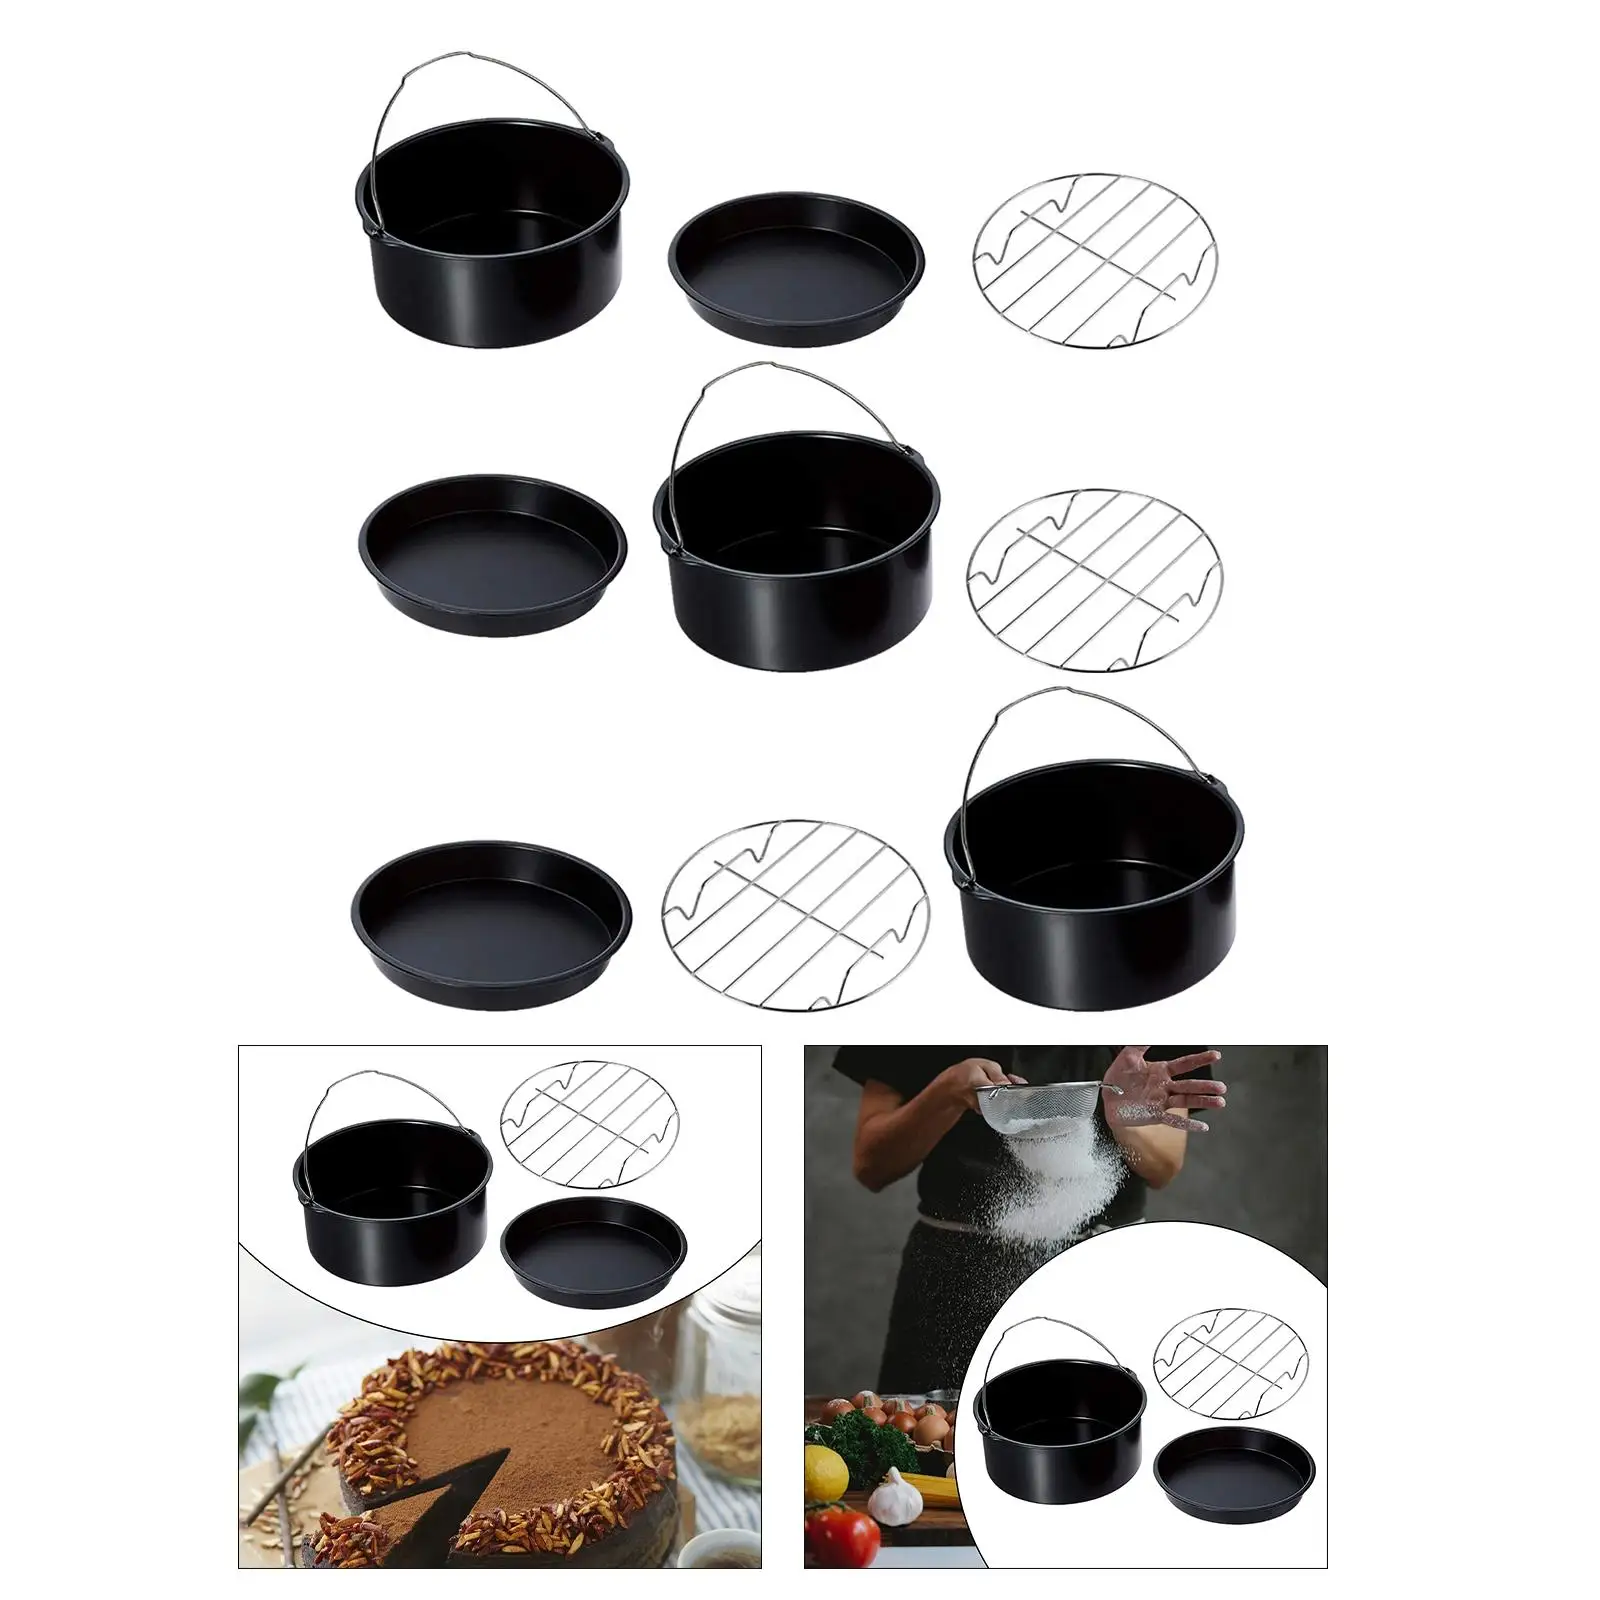 3x Durable Air Fryer Accessories Non-Stick Grill Pizza Pan Cake Basket Skewer Rack for Household Cooking Baking Kitchen BBQ